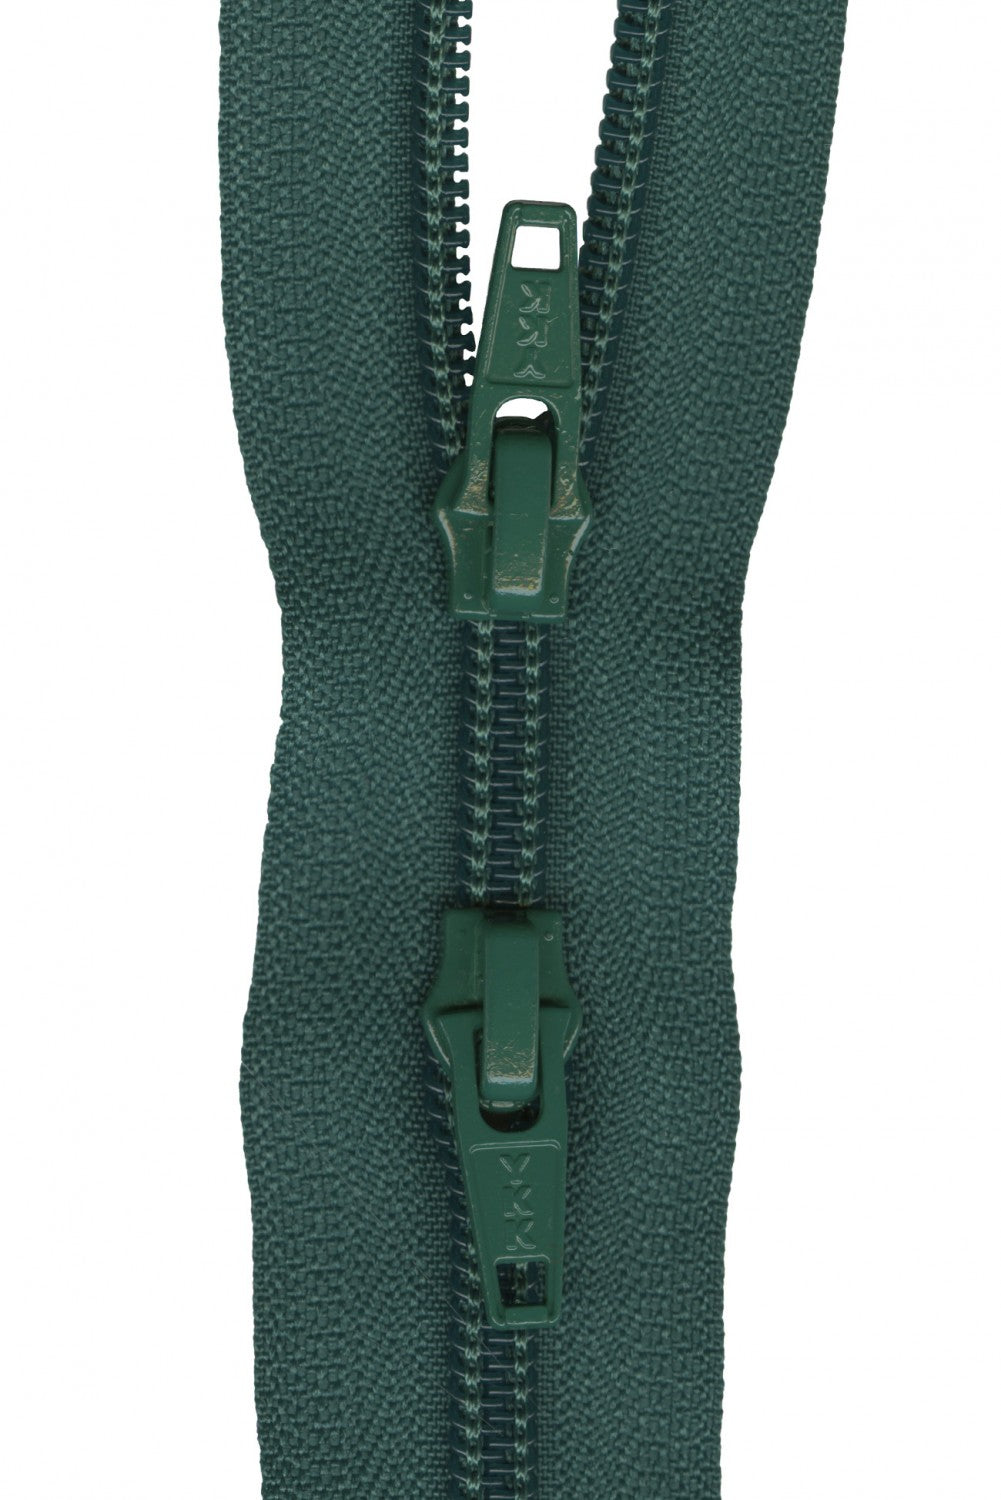 Two Way Close Ended Zipper - Medium Weight Nylon Coil 55cm (22″) - Forest Green